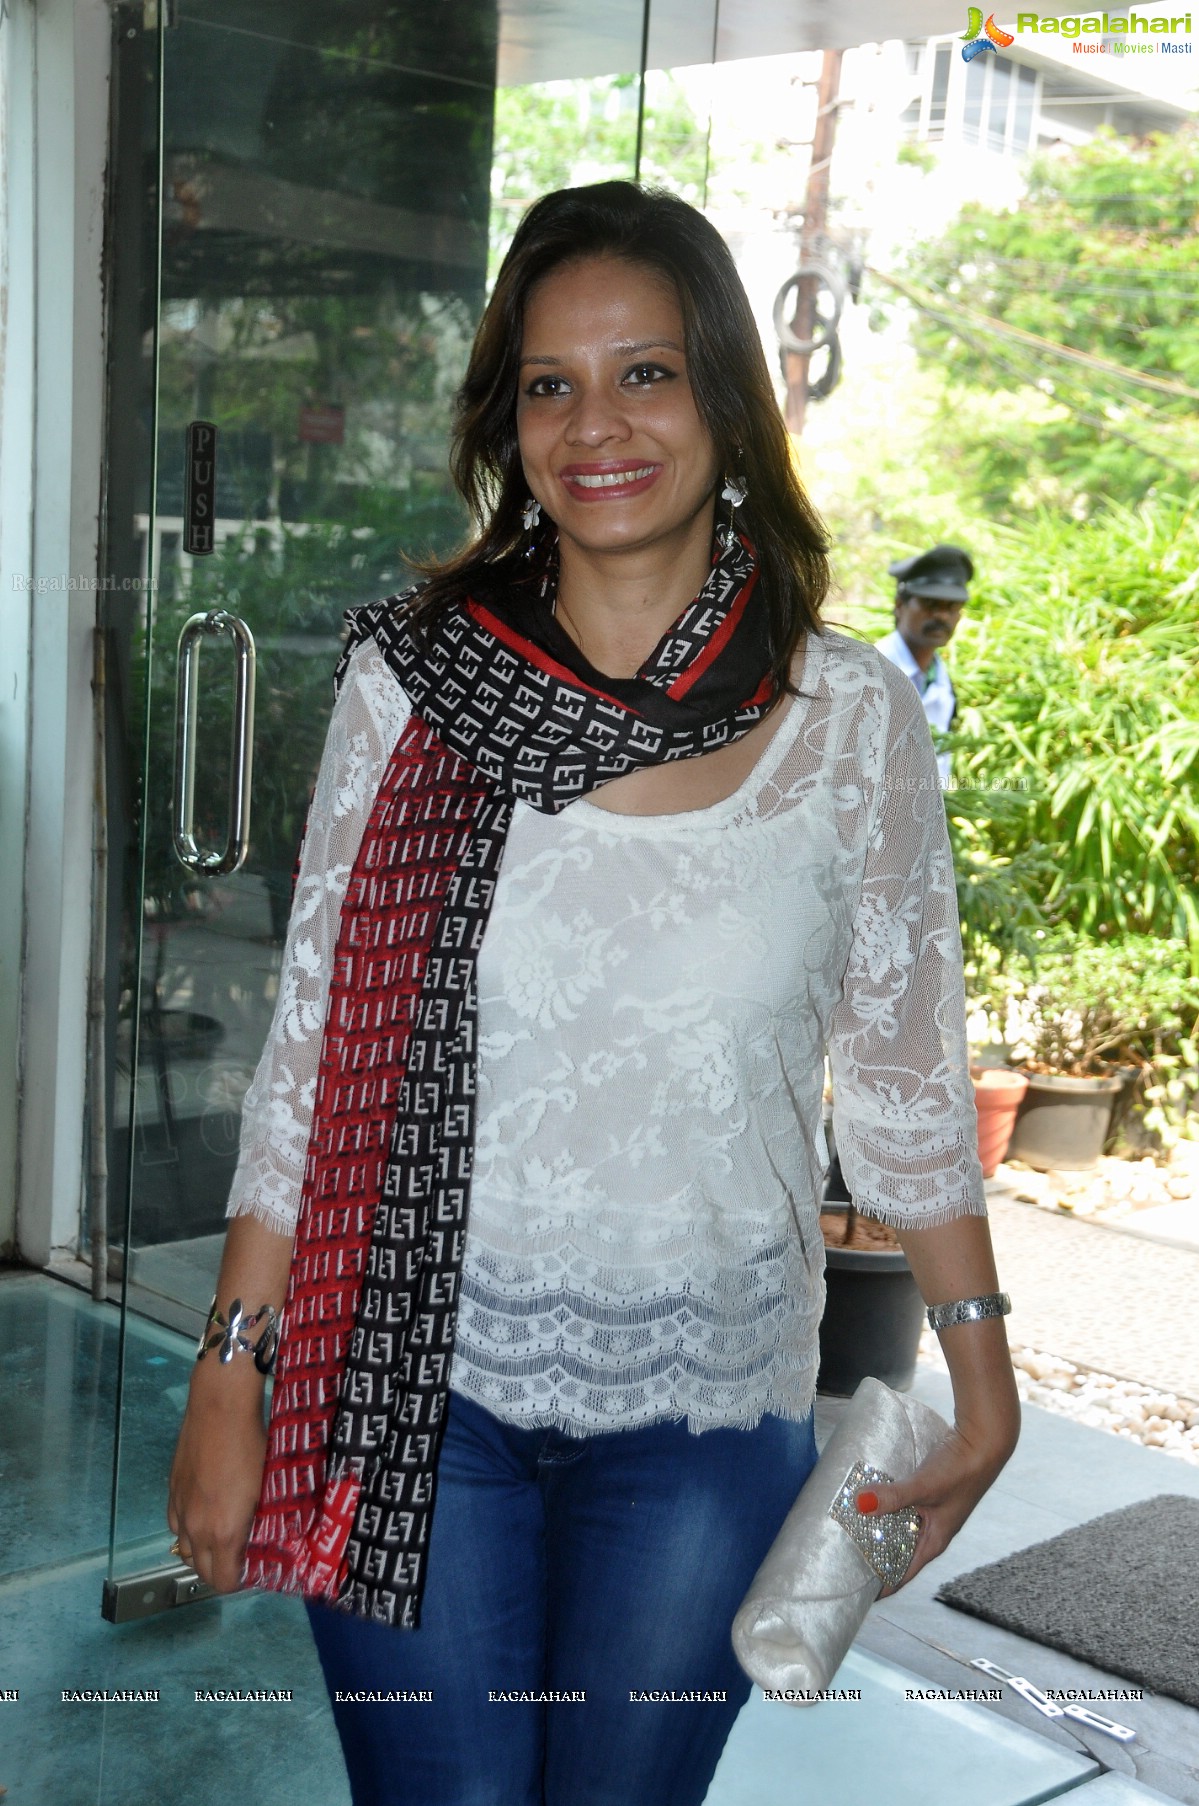 Radhika Agarwal's Lifestyle Products Sale at Coffee Affairs, Hyderabad